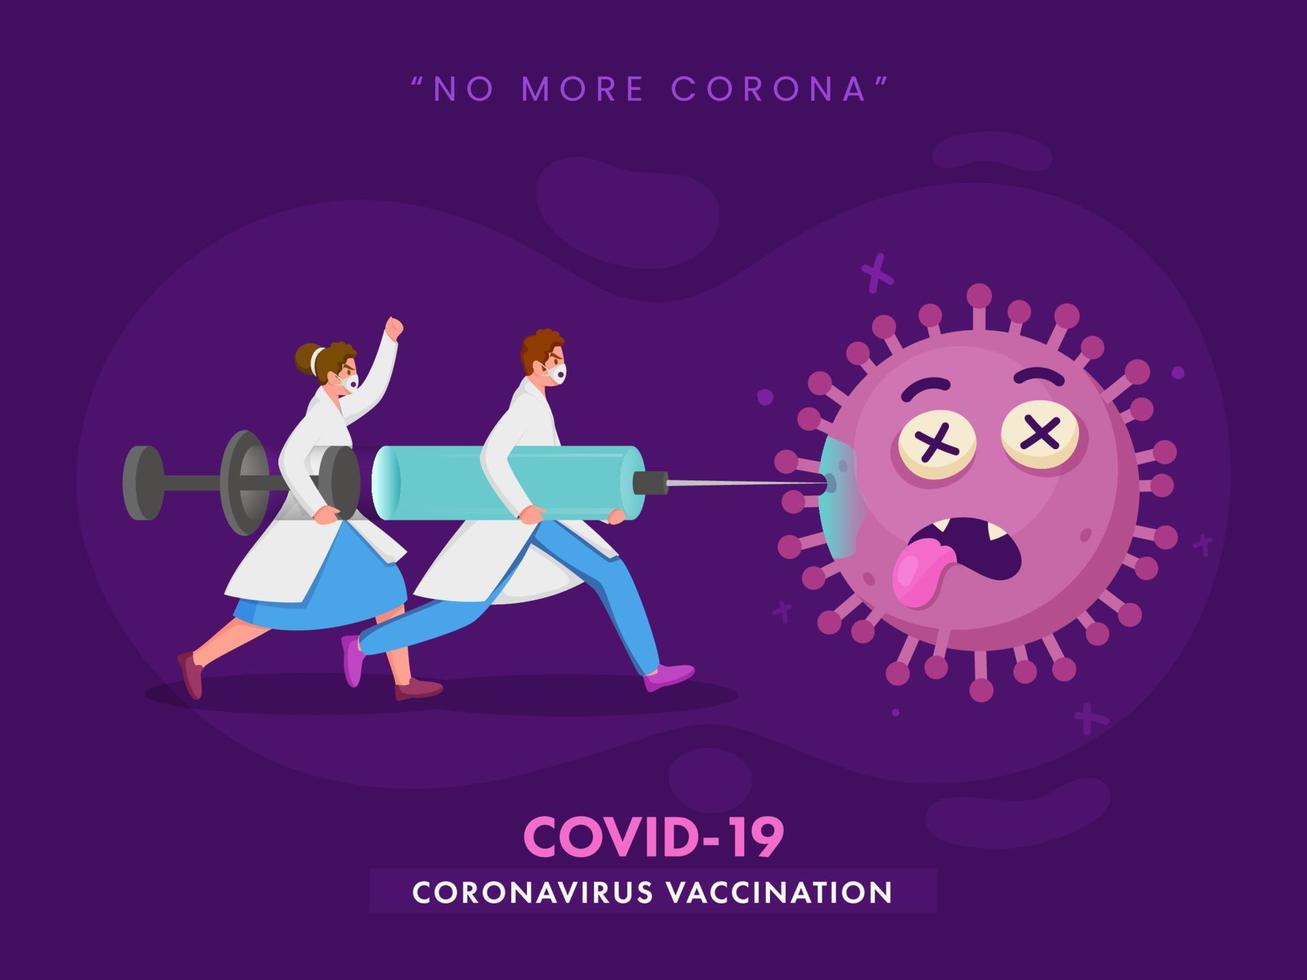 Man And Woman Doctors Fighting With Coronavirus Using Vaccine Injection On Purple Background For No More Corona Or Covid-19. vector